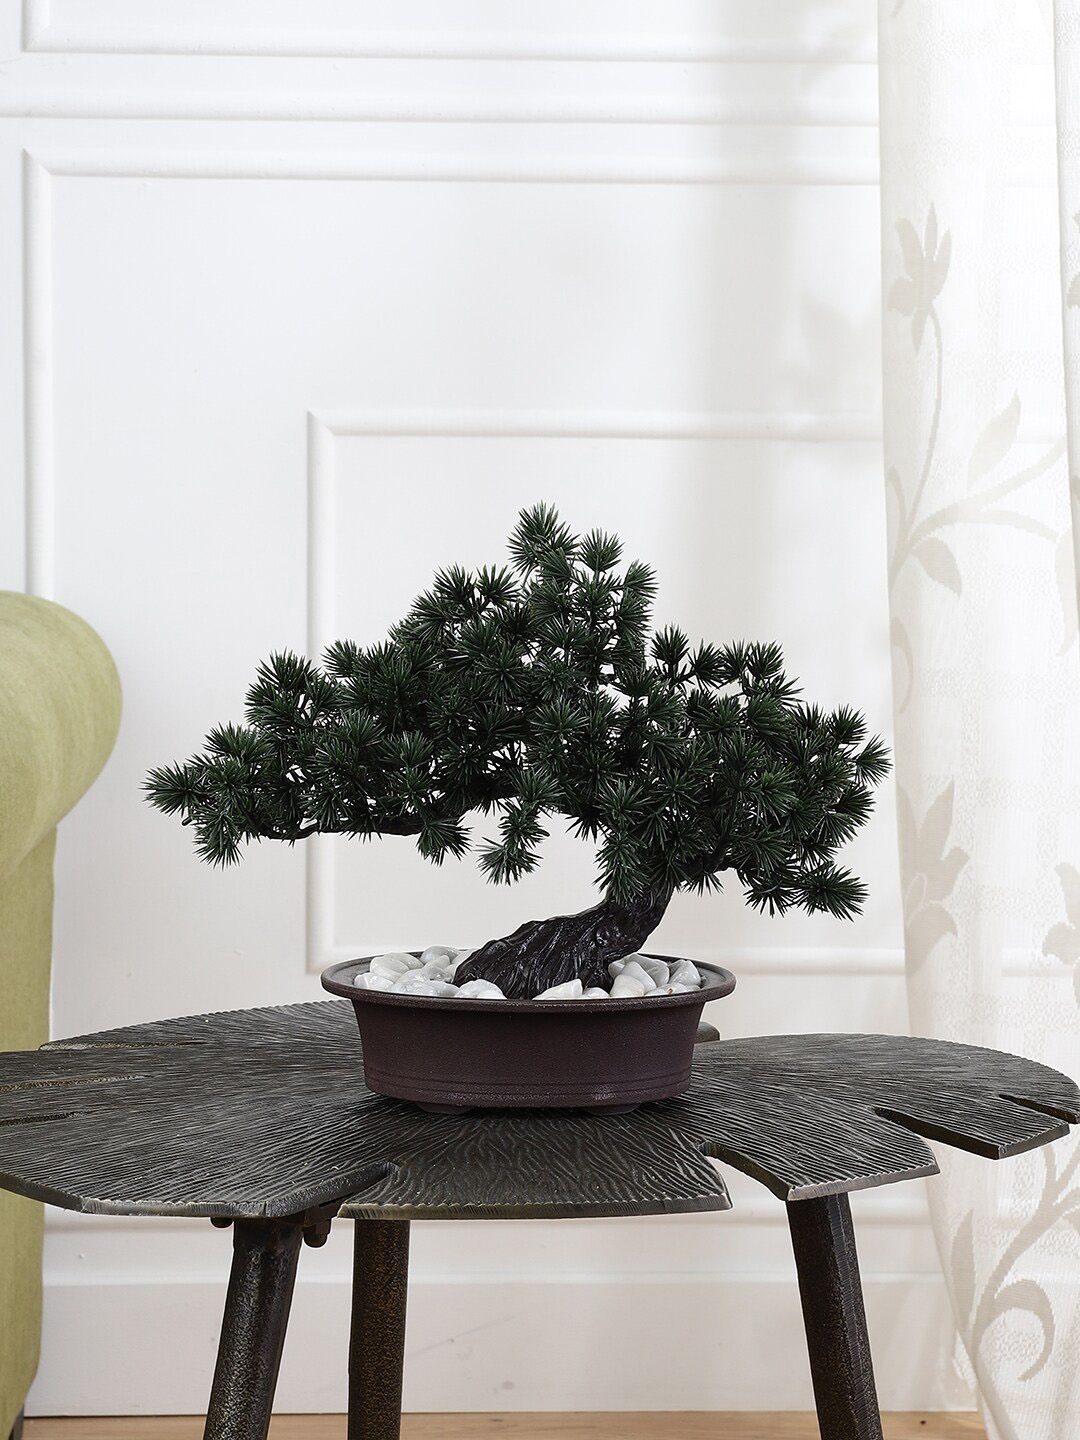 FOLIYAJ Green & Black Artificial Bent Bonsai Tree With Pine Leaves With Pot Price in India